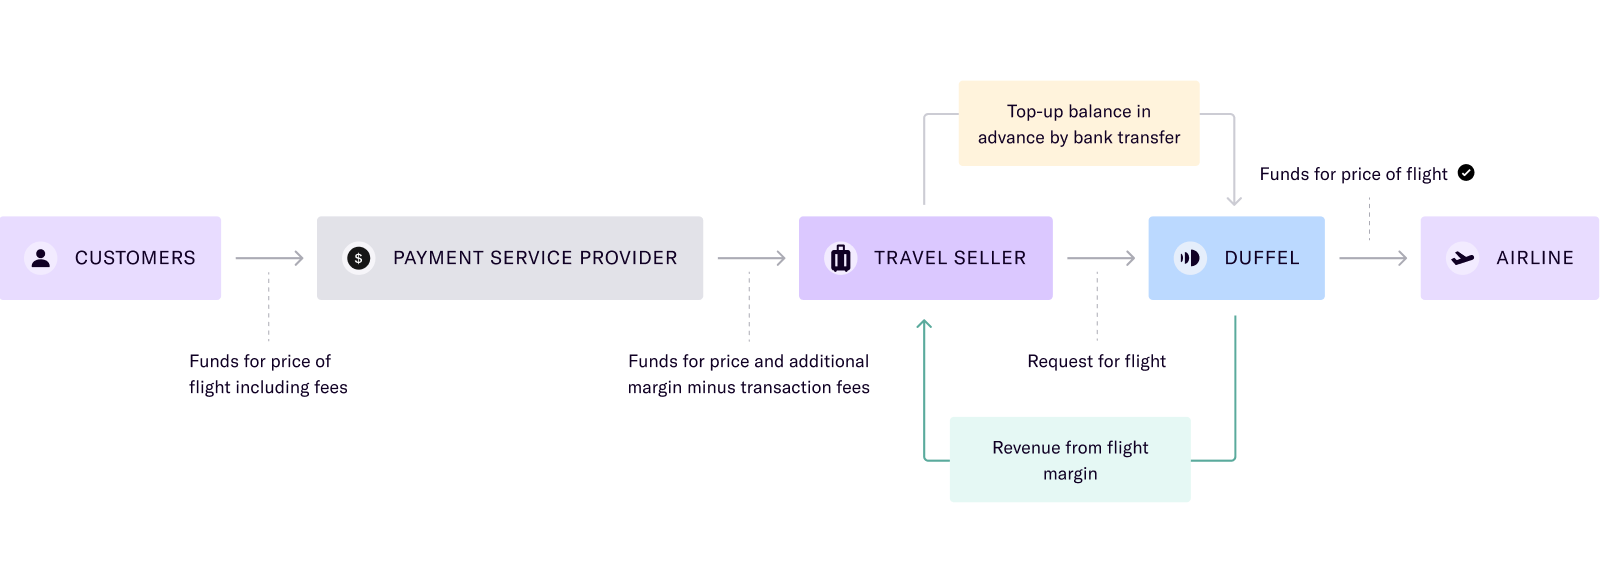 Diagram illustrating the flow of money from travel seller to airline without Duffel payments